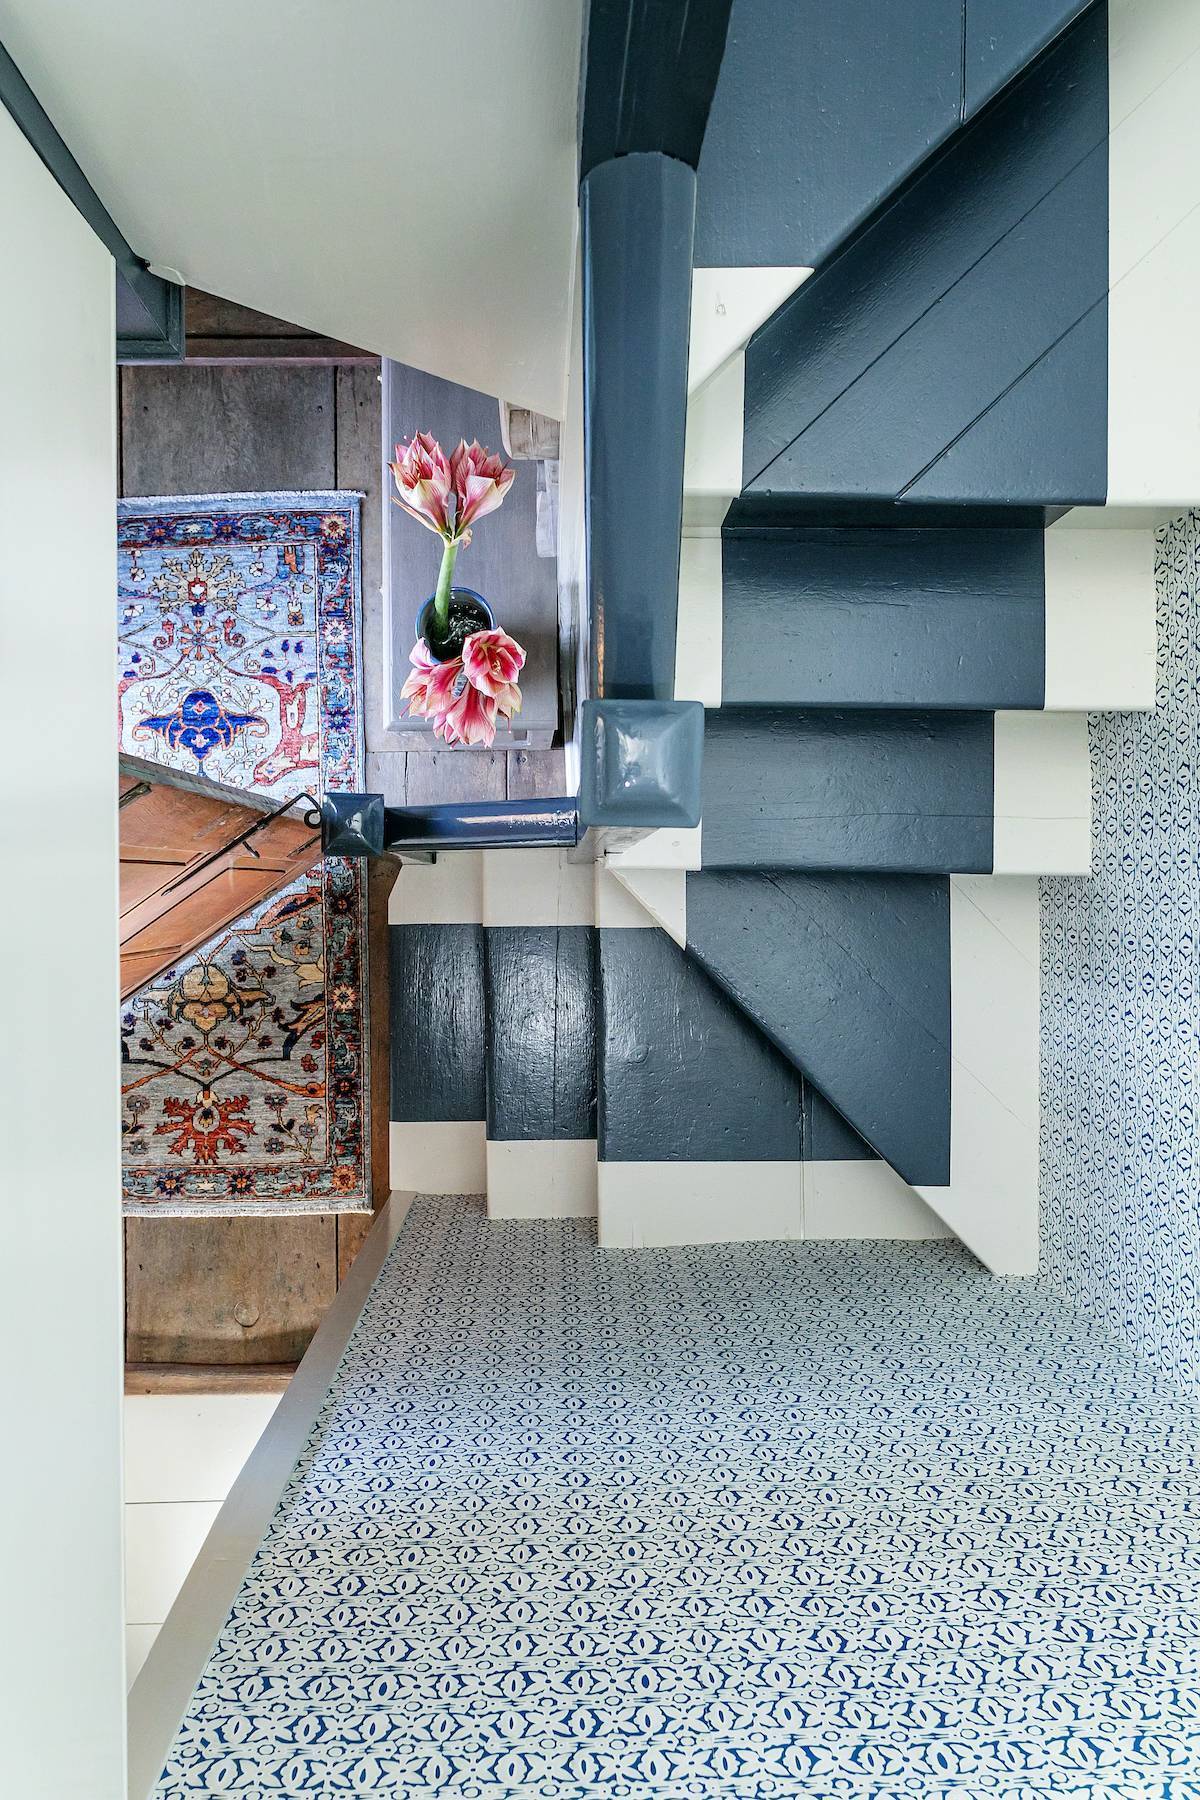 Area rugs at the bottom of a staircase